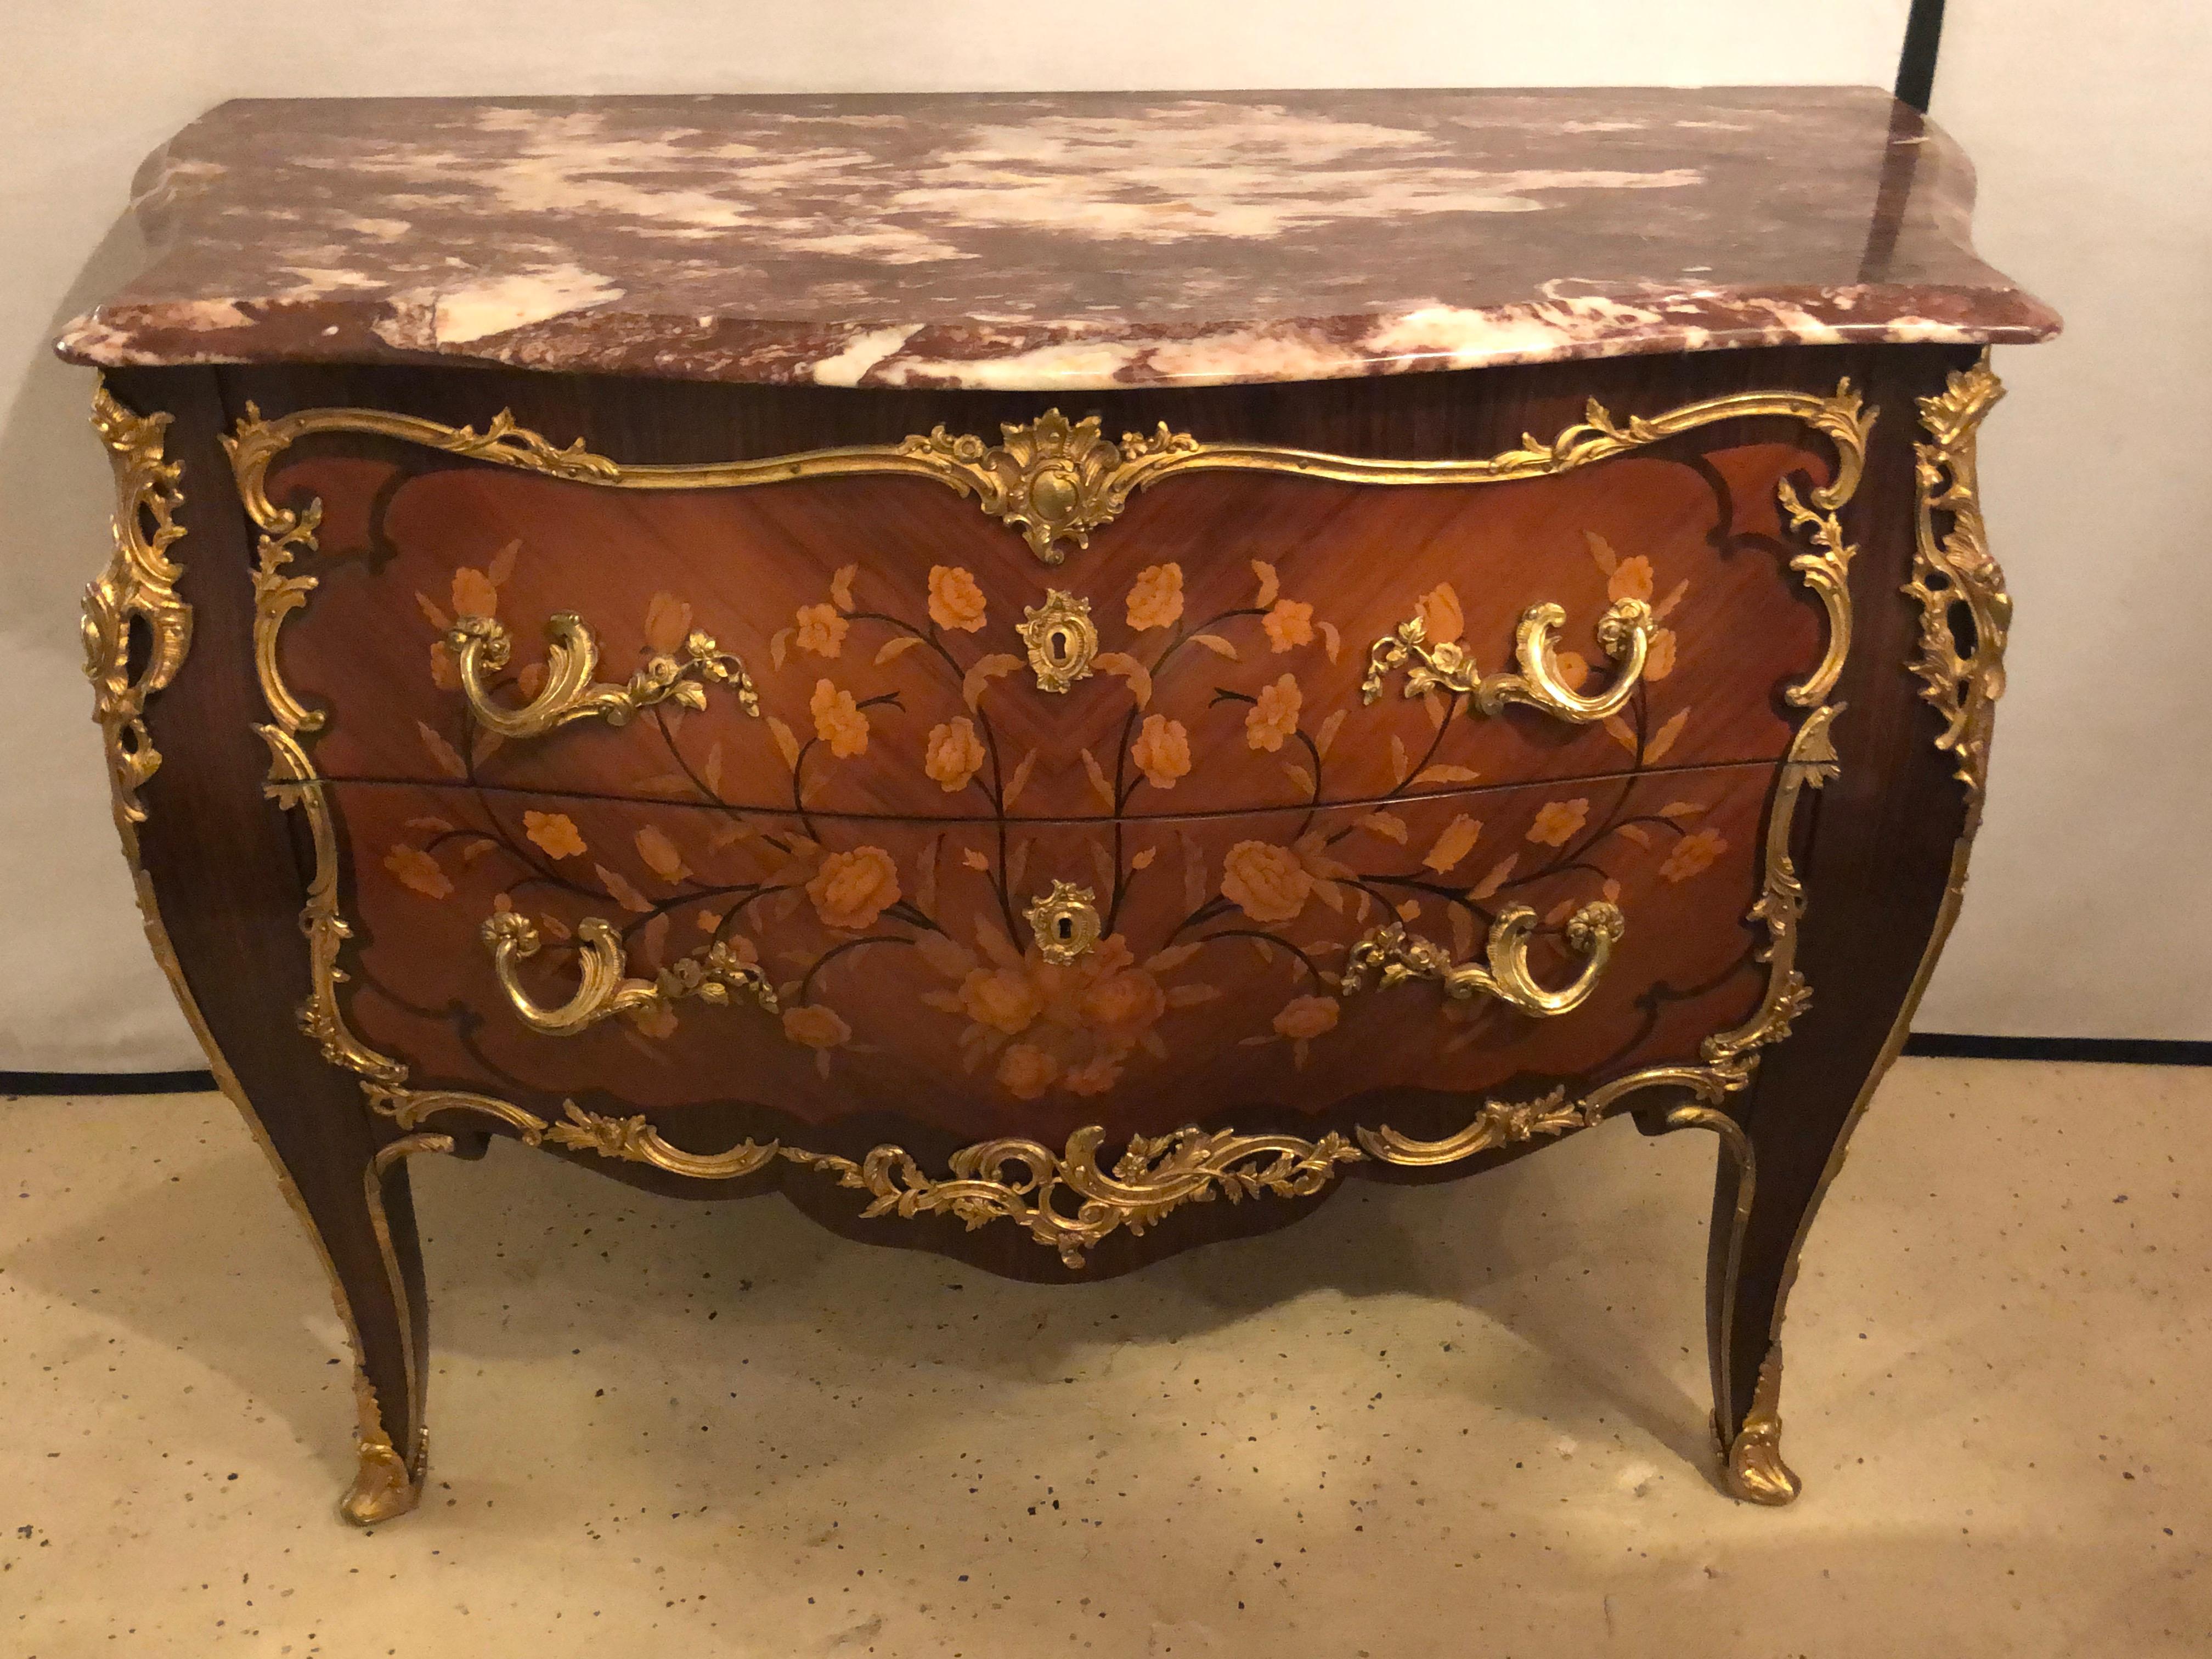 Pair of Marble-Top Bronze Mounted Bombe Floral Inlaid Louis XV Style Commodes 1